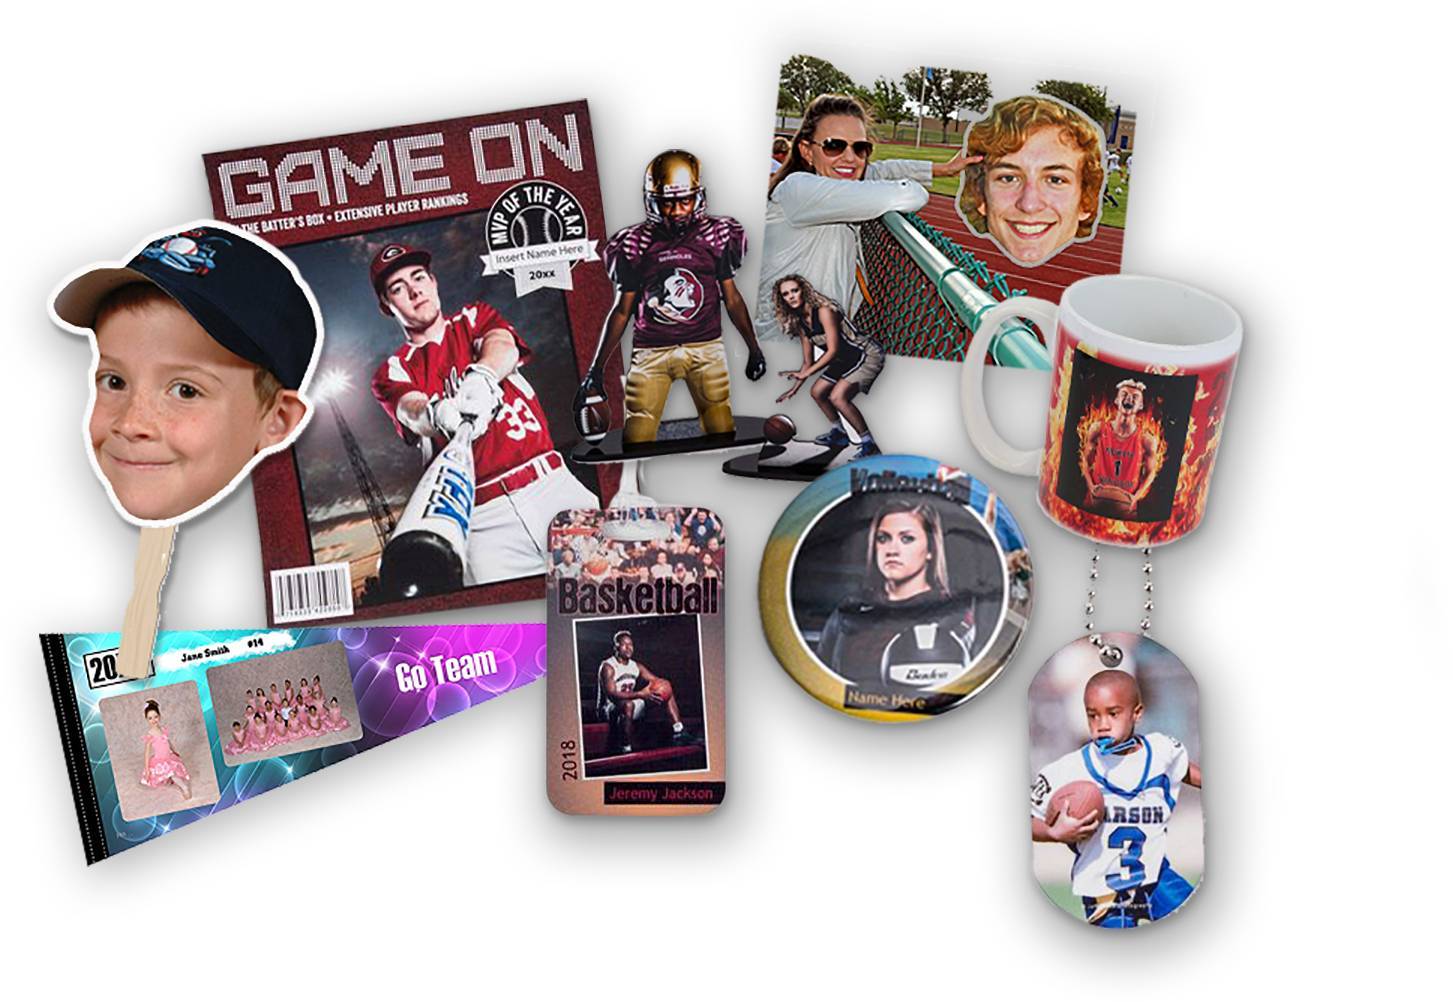 ProClicks offers a full line of sports memorabilia that's loved by every fan. From buttons, keychains, magnets, mugs, and pennants, we have them all at affordable prices.